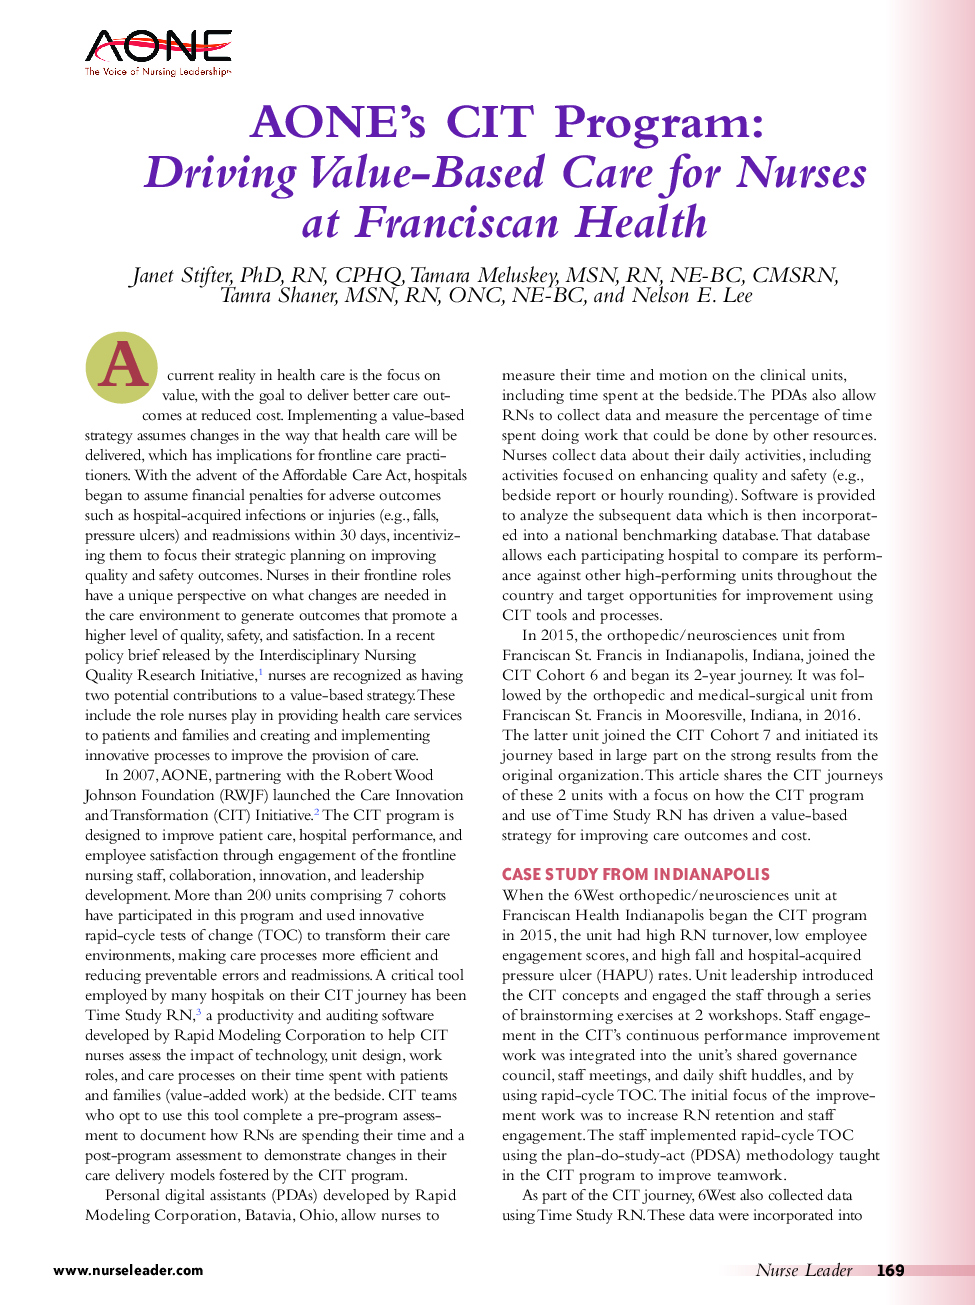 AONE's CIT Program: Driving Value-Based Care for Nurses at Franciscan Health